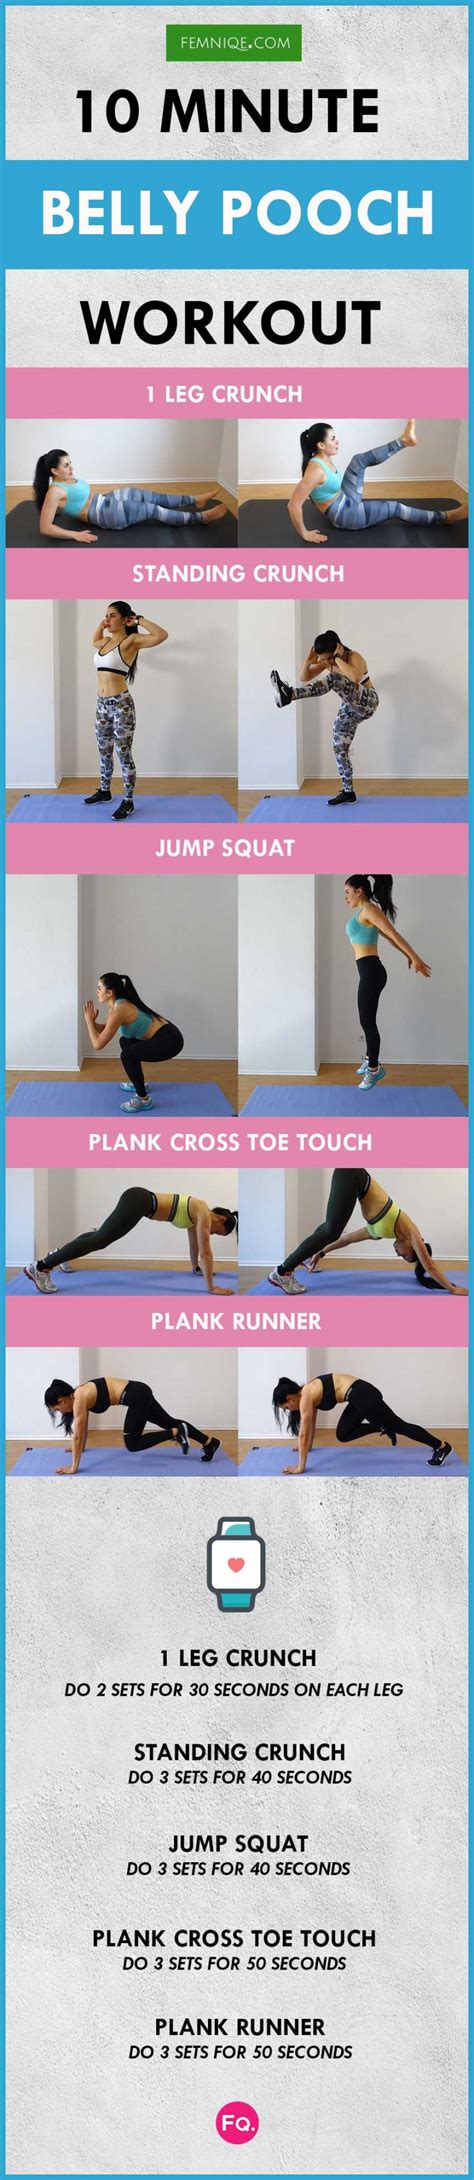 How To Lose Belly Pooch Fast 10 Minute Workout Meal Plan Femniqe